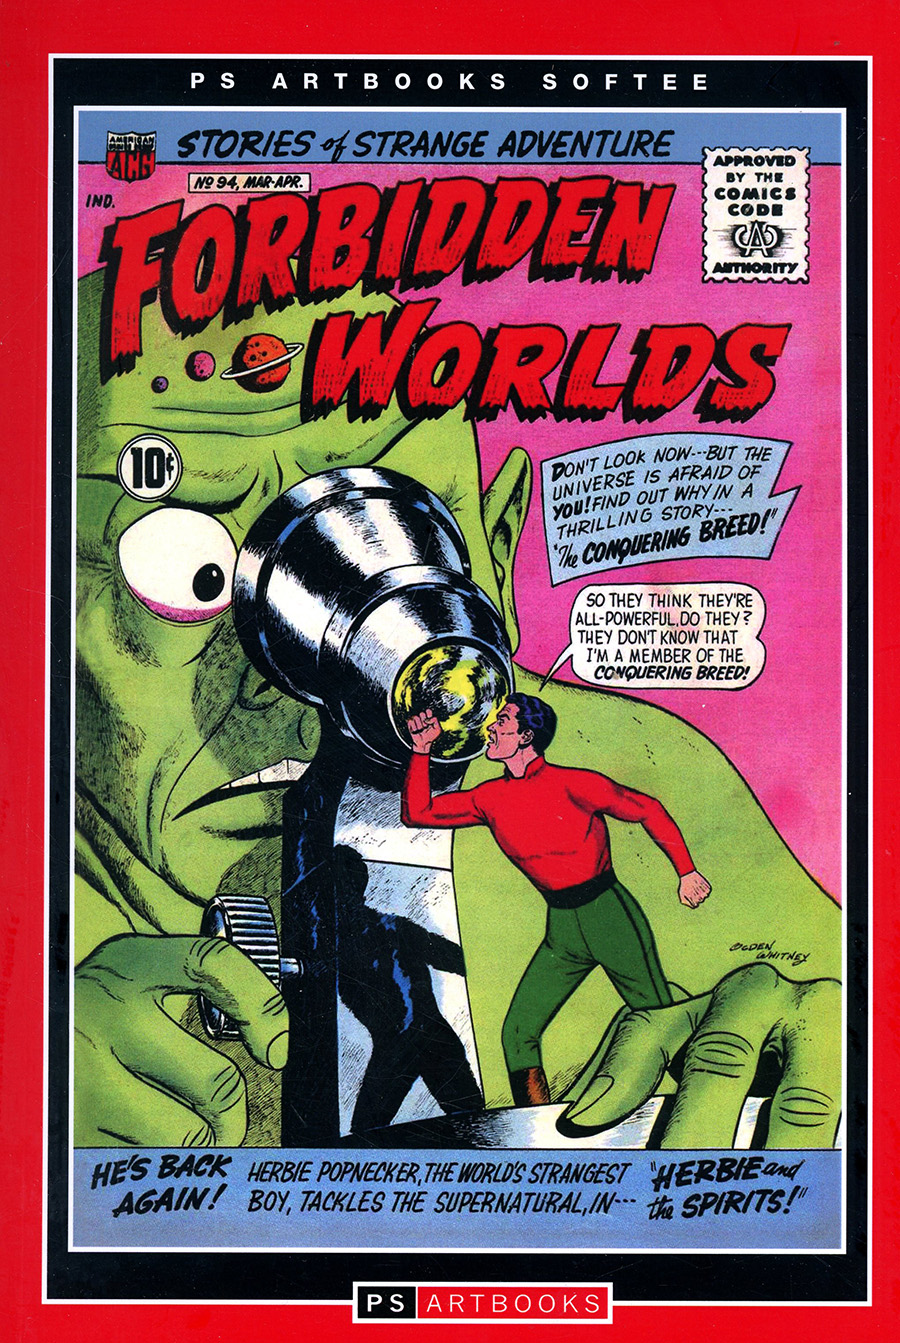 ACG Collected Works Forbidden Worlds Softee Vol 15 TP